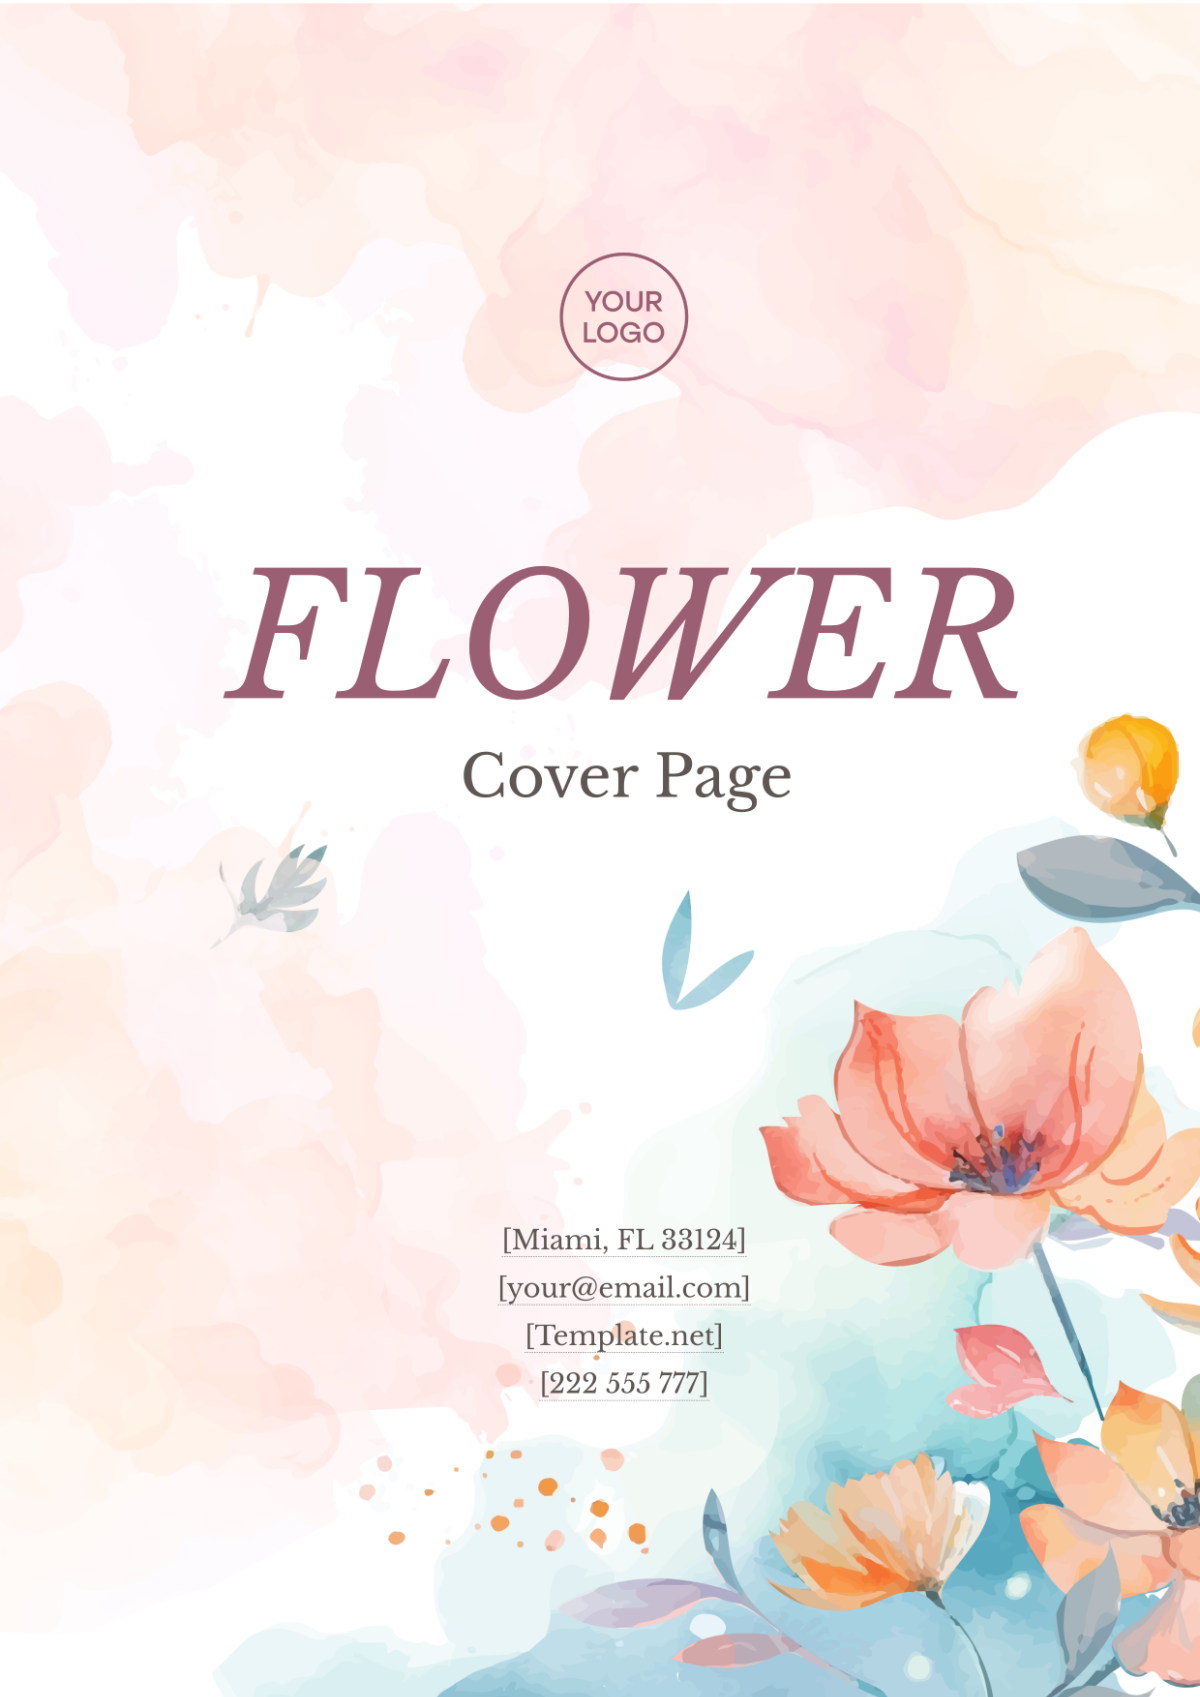 Flower Cover Page Image